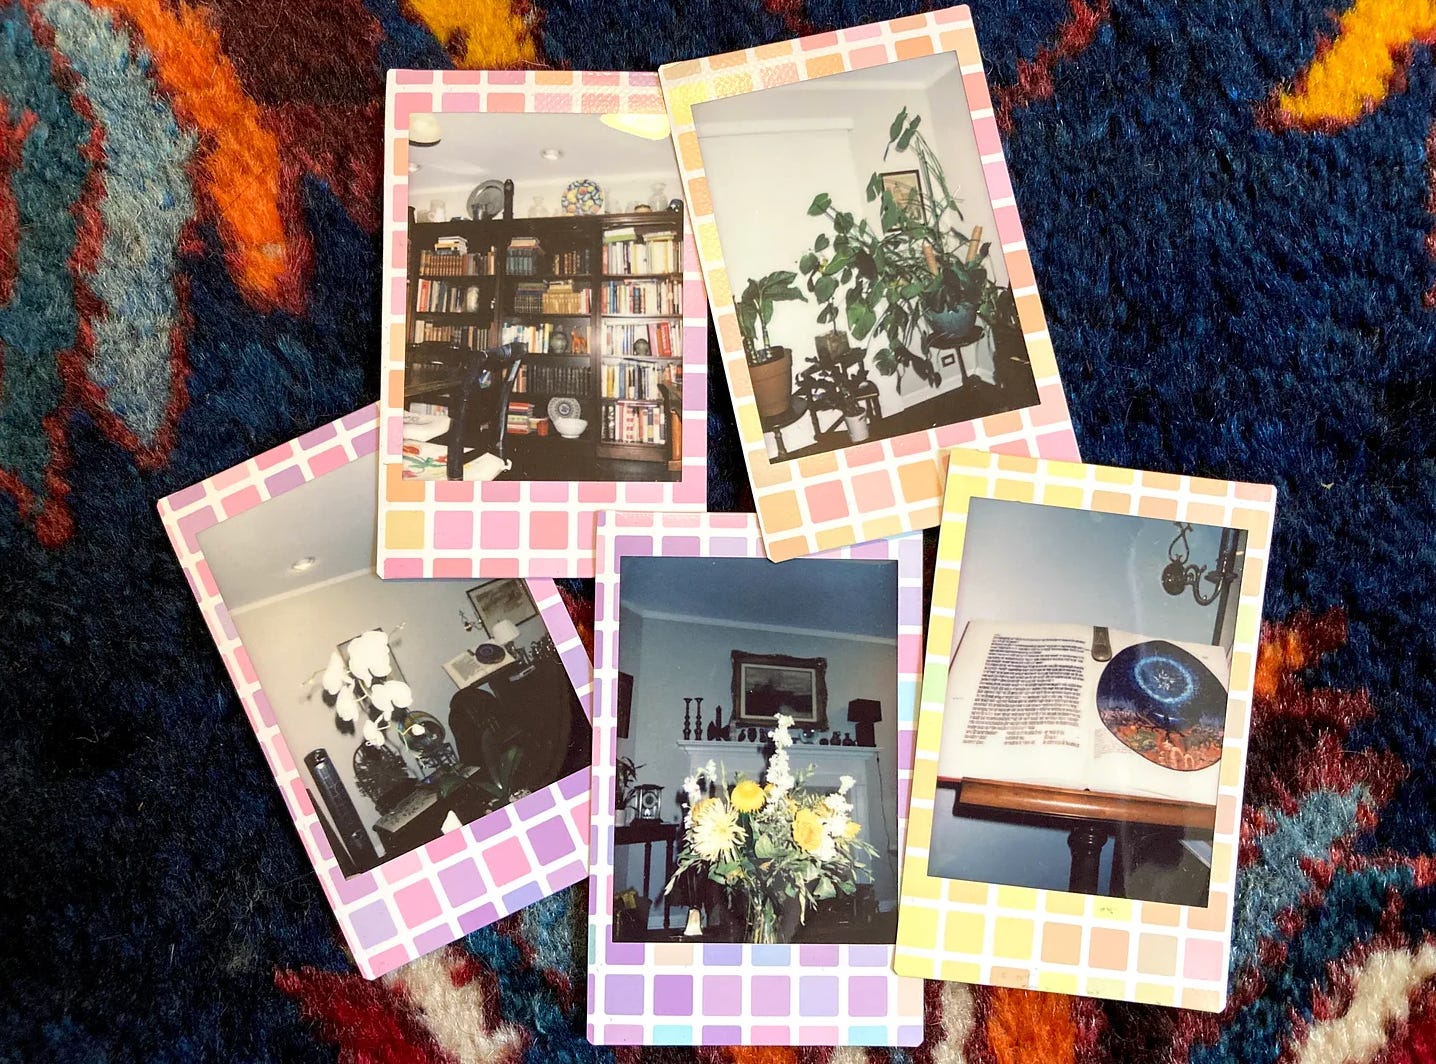 Five pictures arranged on a patterend dark blue carpet. The pictures are of a brown bookcase, a green plant in a brown pot, yellow and white flowers and an open book.